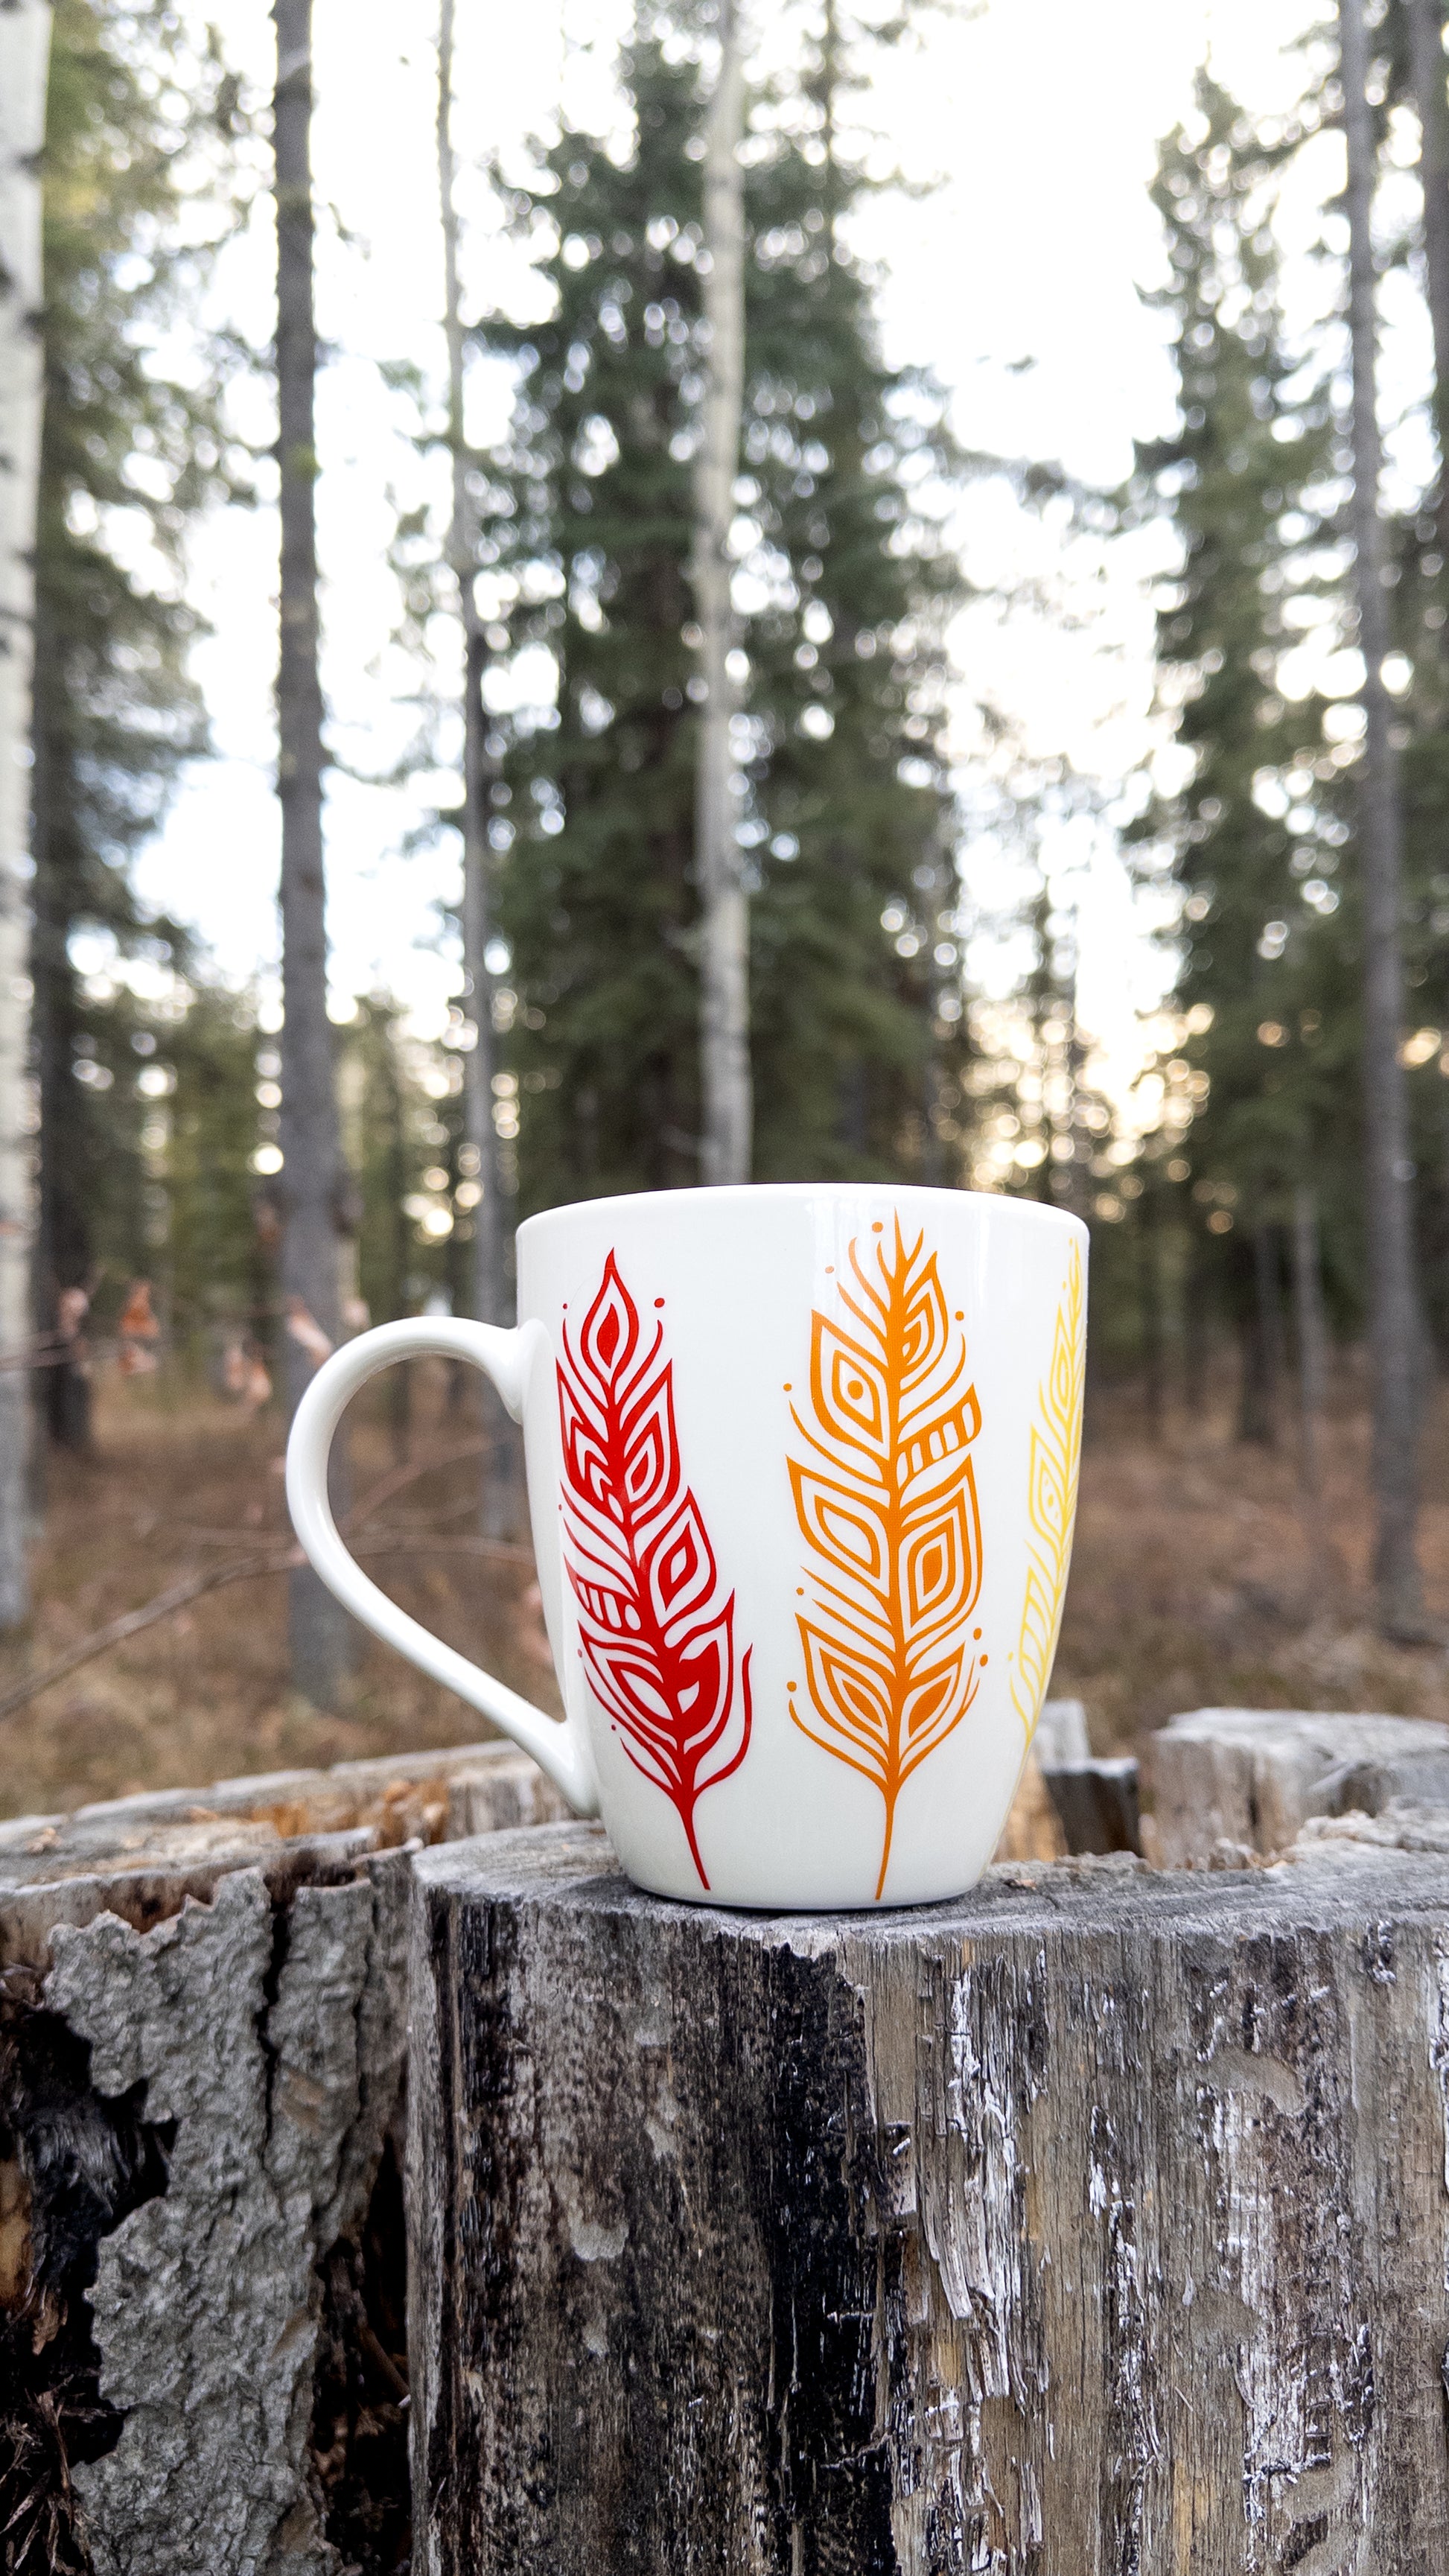 Patrick's Pride Feathers on a tall white mug, resting on a tree stump. The image shows the red, orange, and yellow feathers on one side.